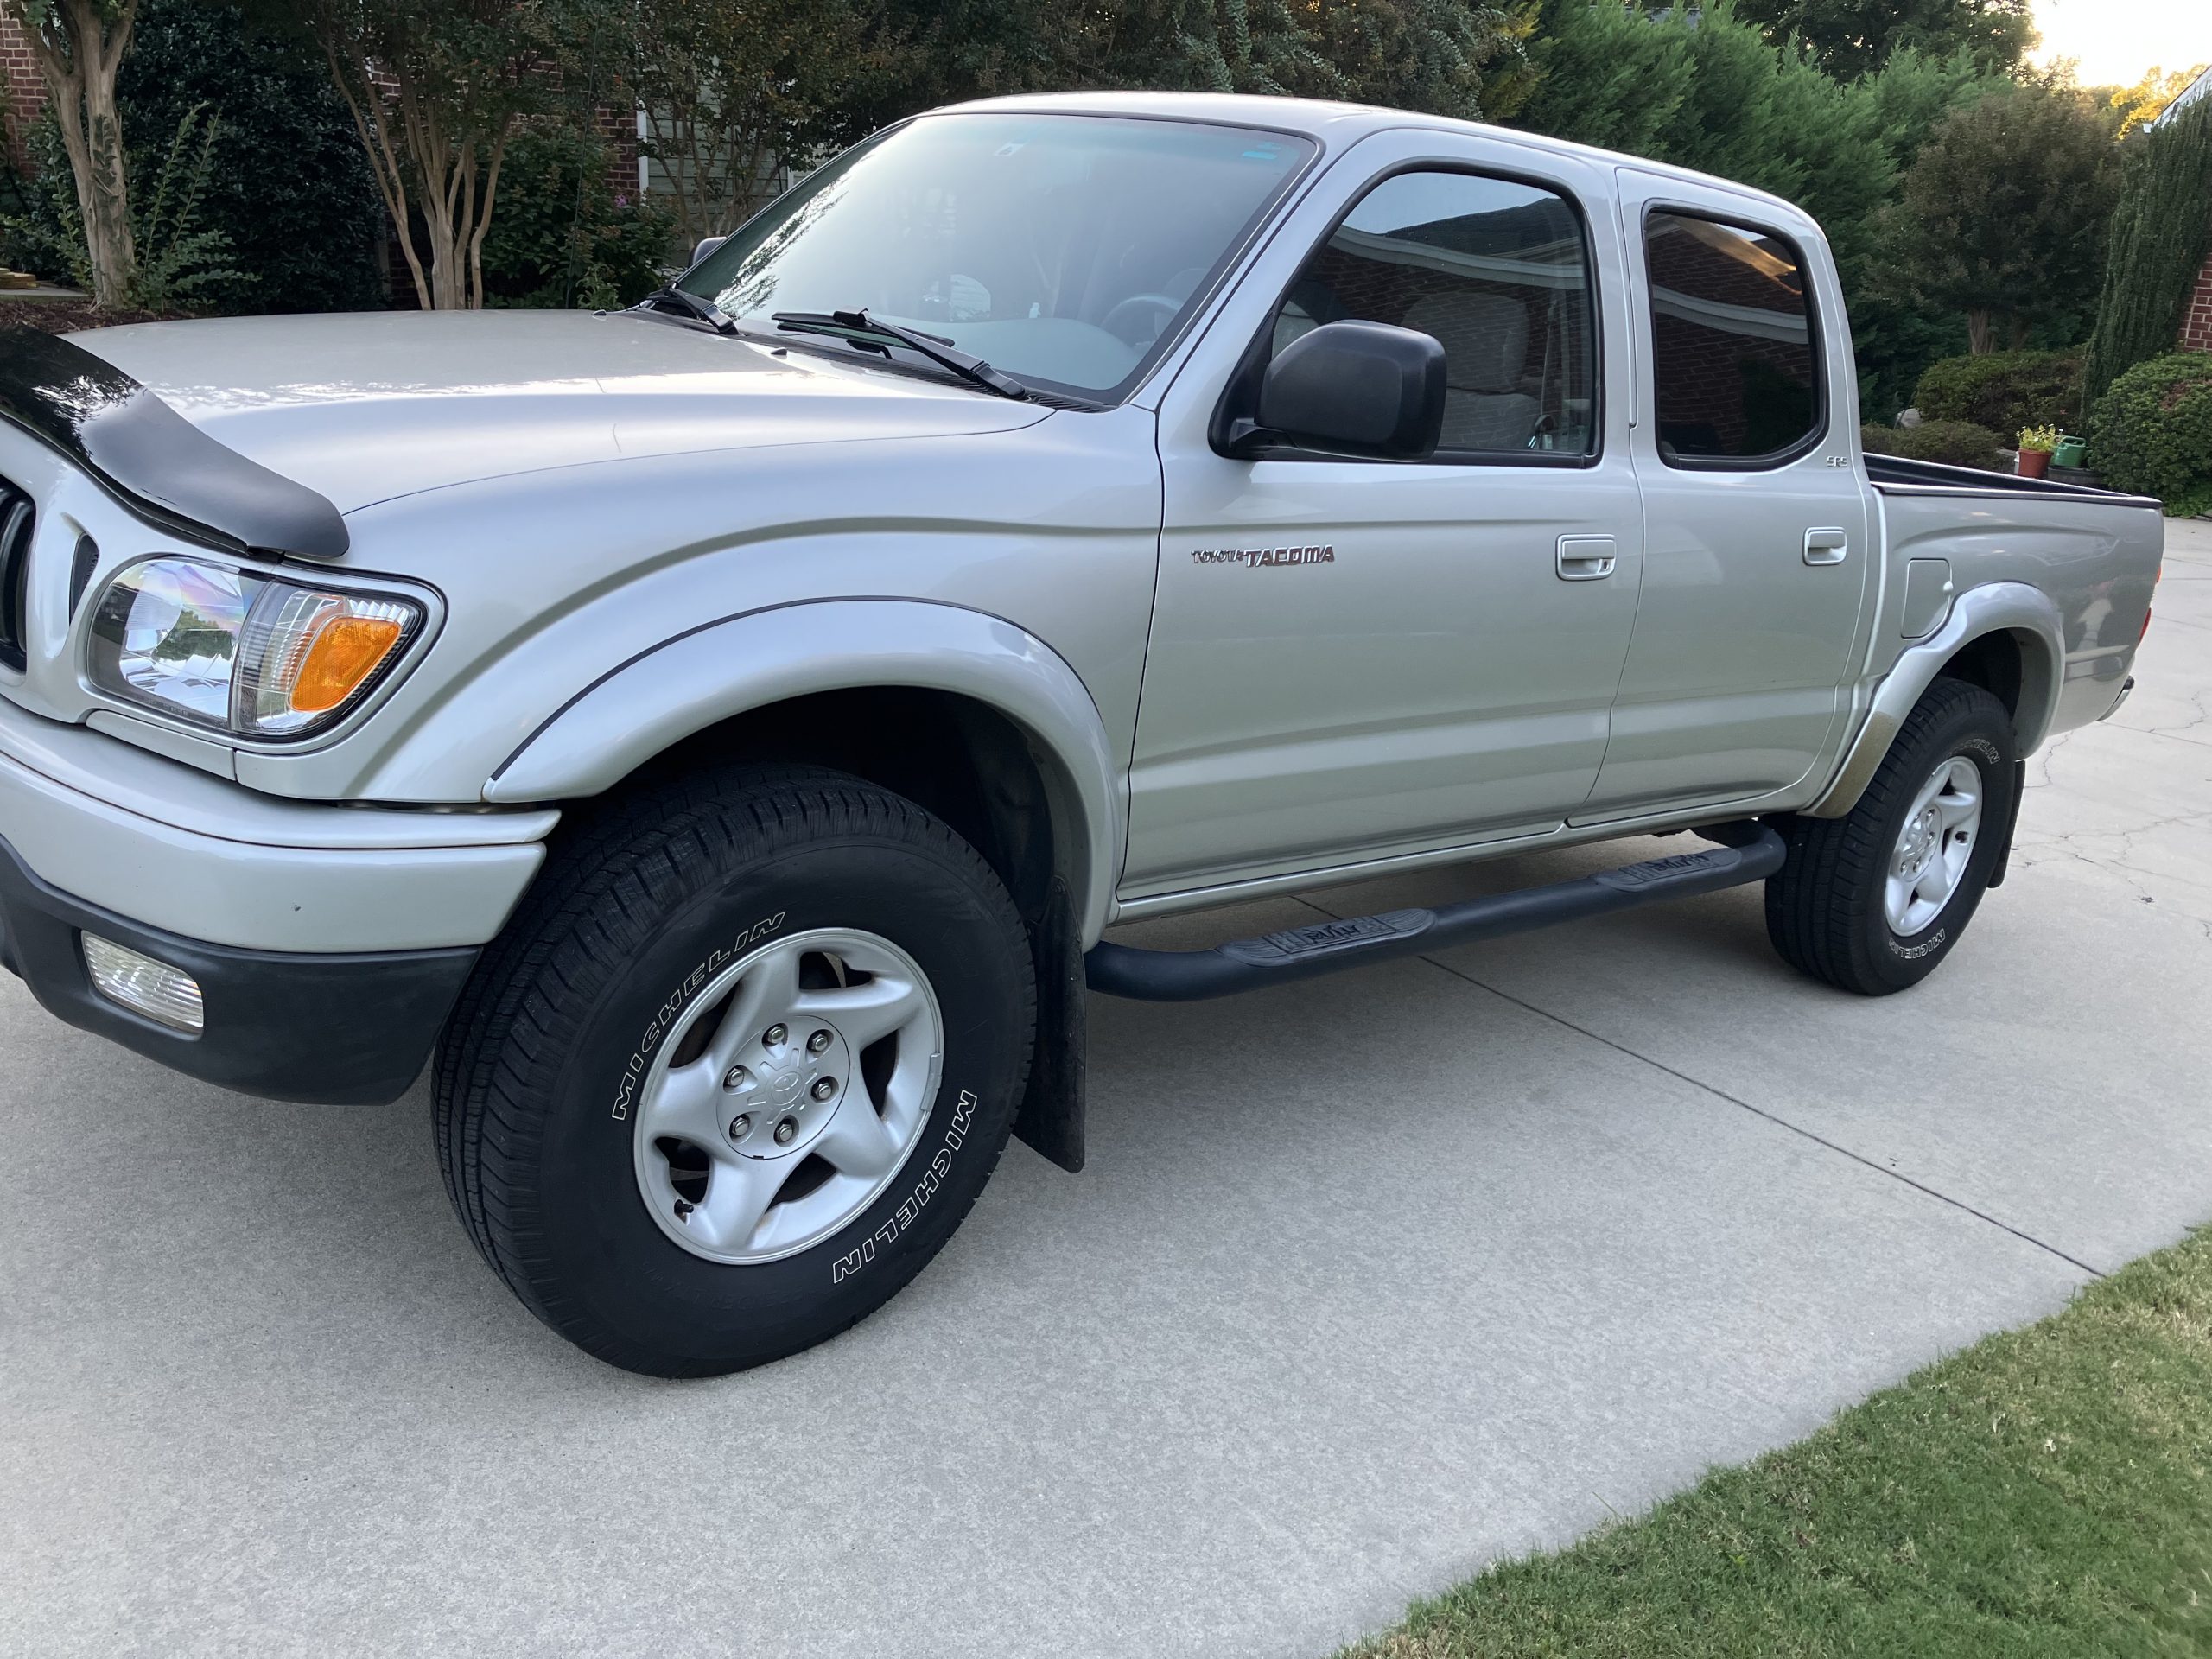 2002 Toyota Tacoma PreRunner Double Cab